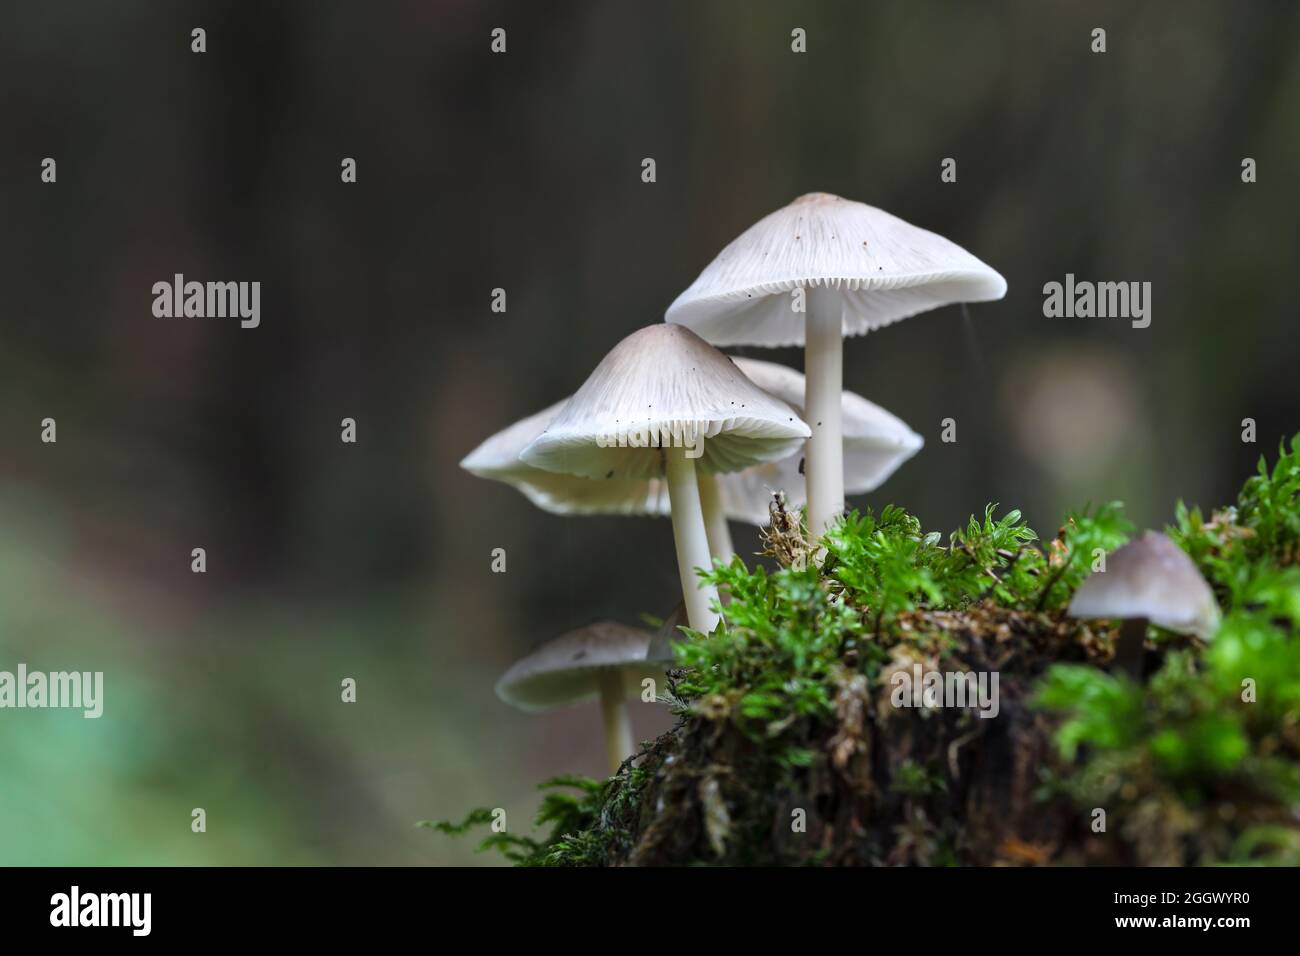 Mushrooms Growing on a Moss Covered Tree Stump, Teesdale, County Durham, UK Stock Photo